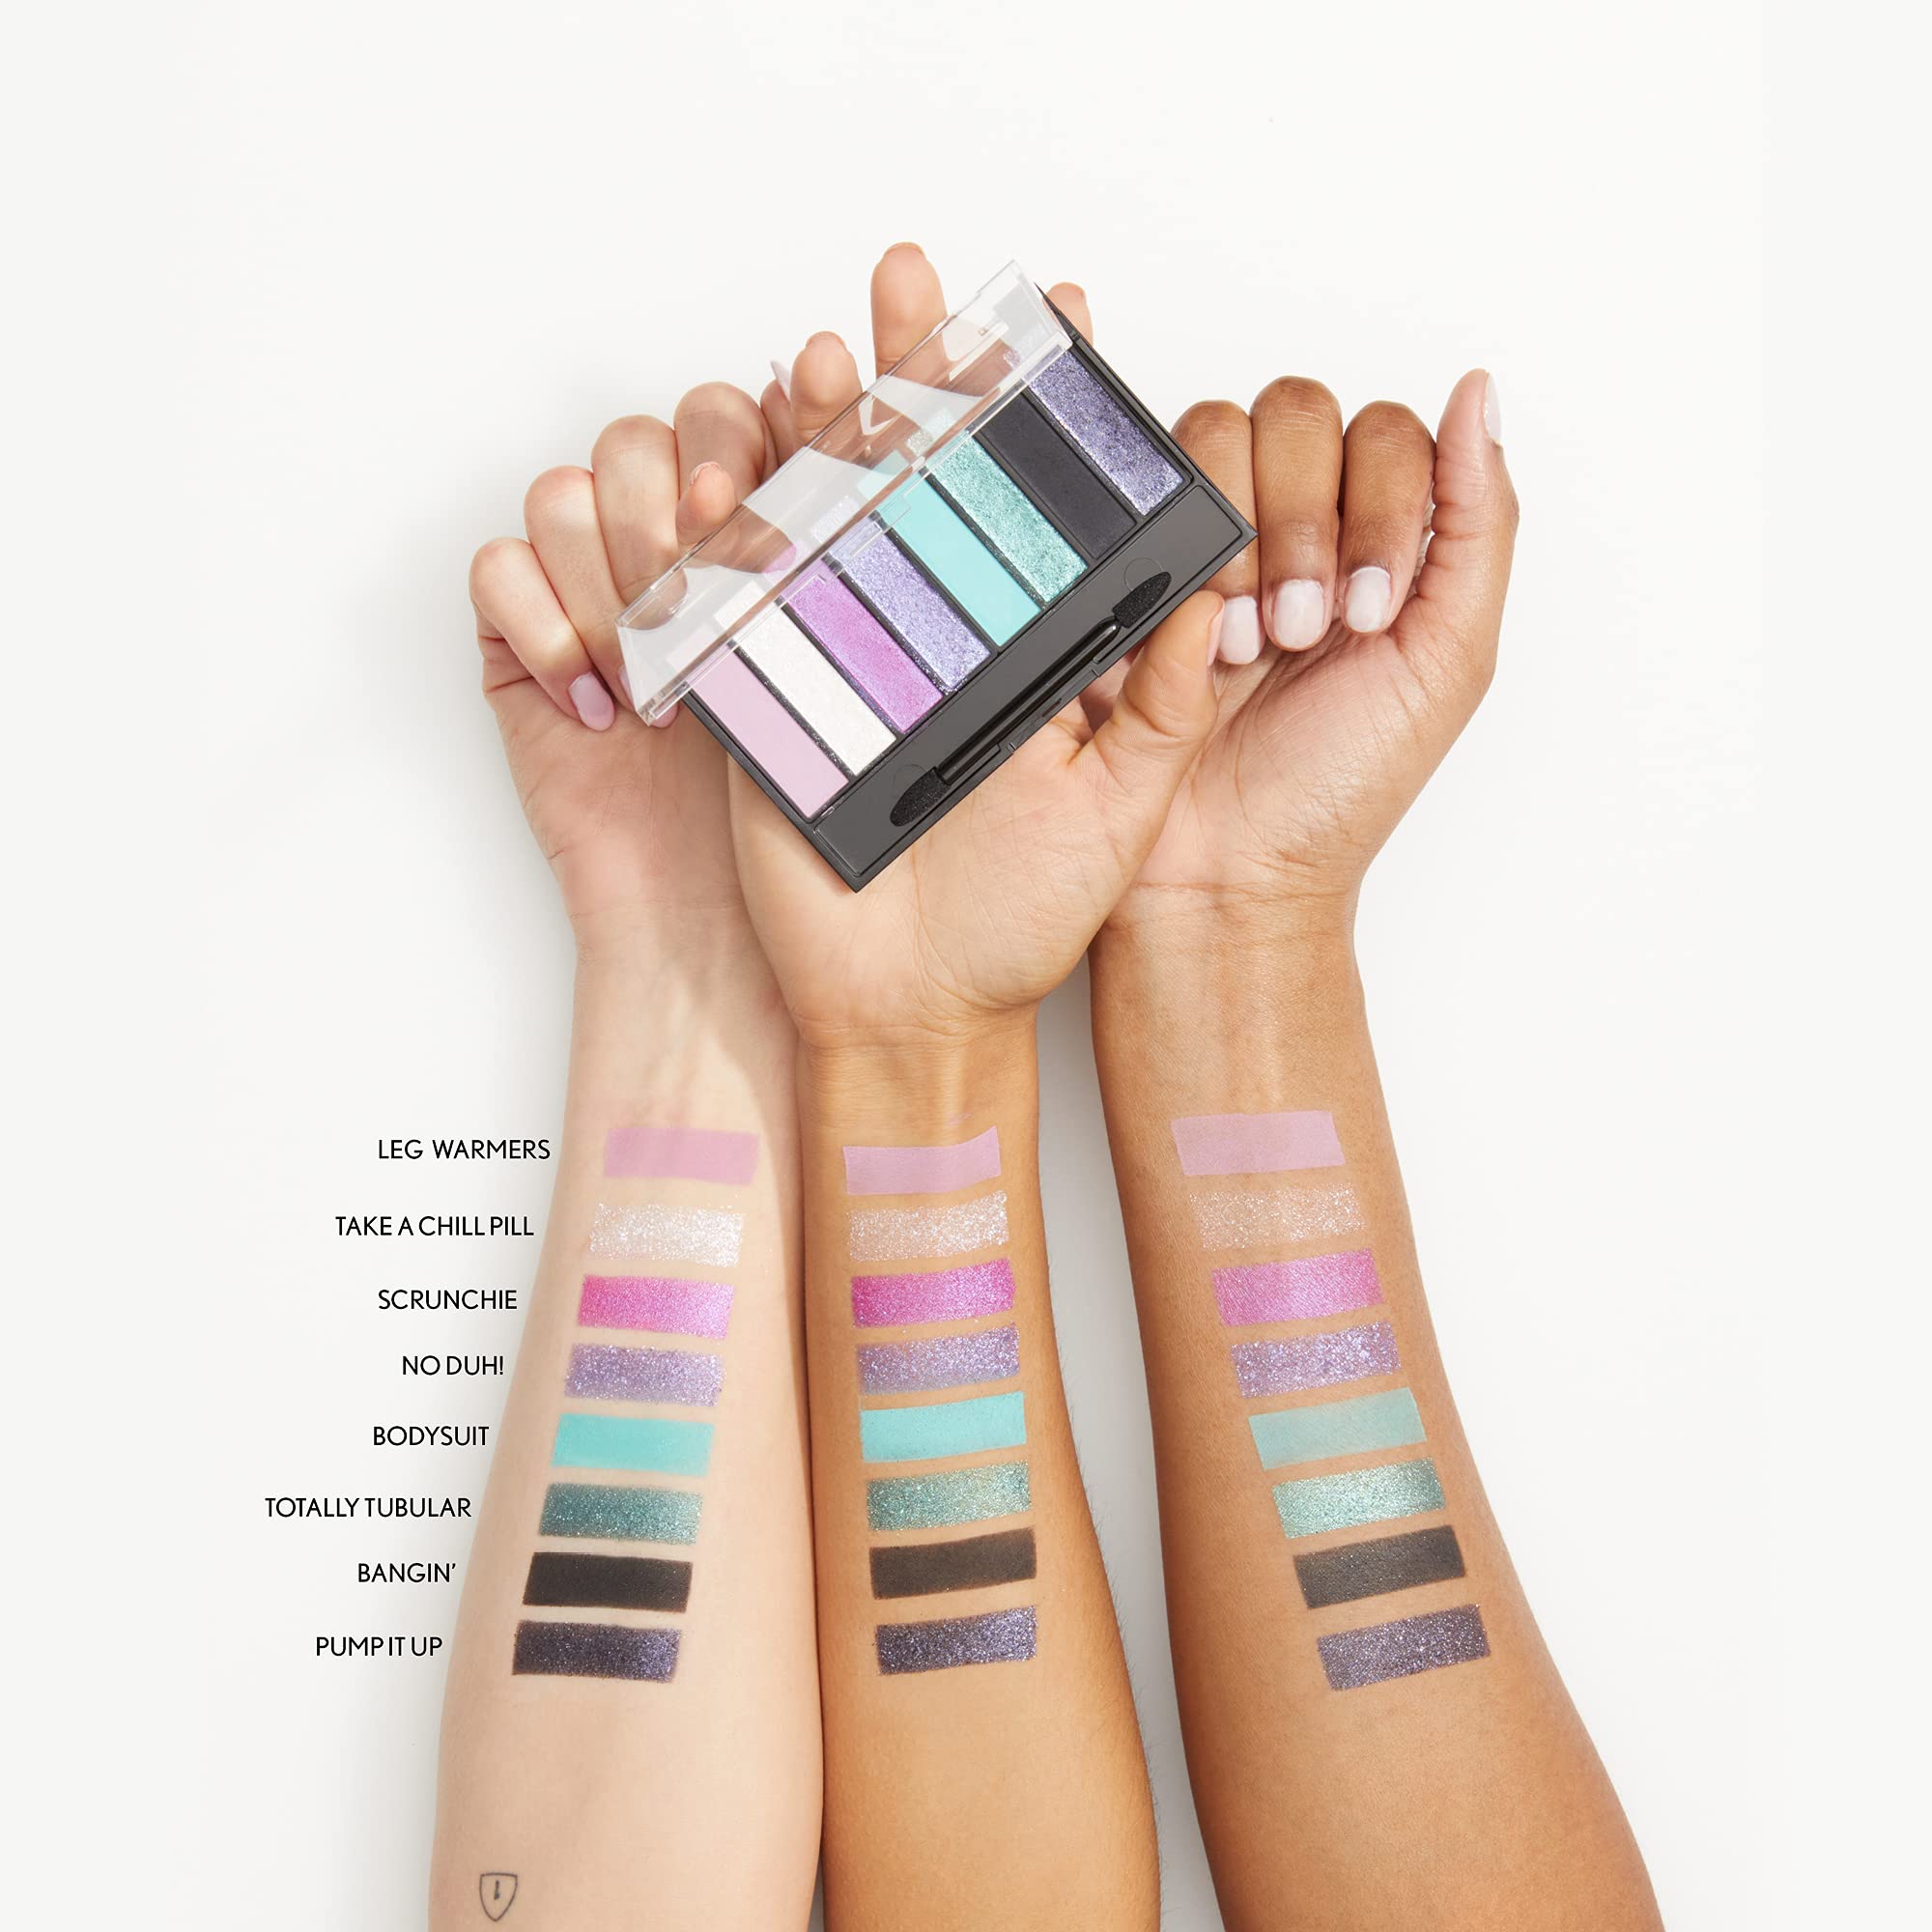 COVERGIRL TruNaked Eye Shadow Palette Pack, That’s Rad, 1 Count